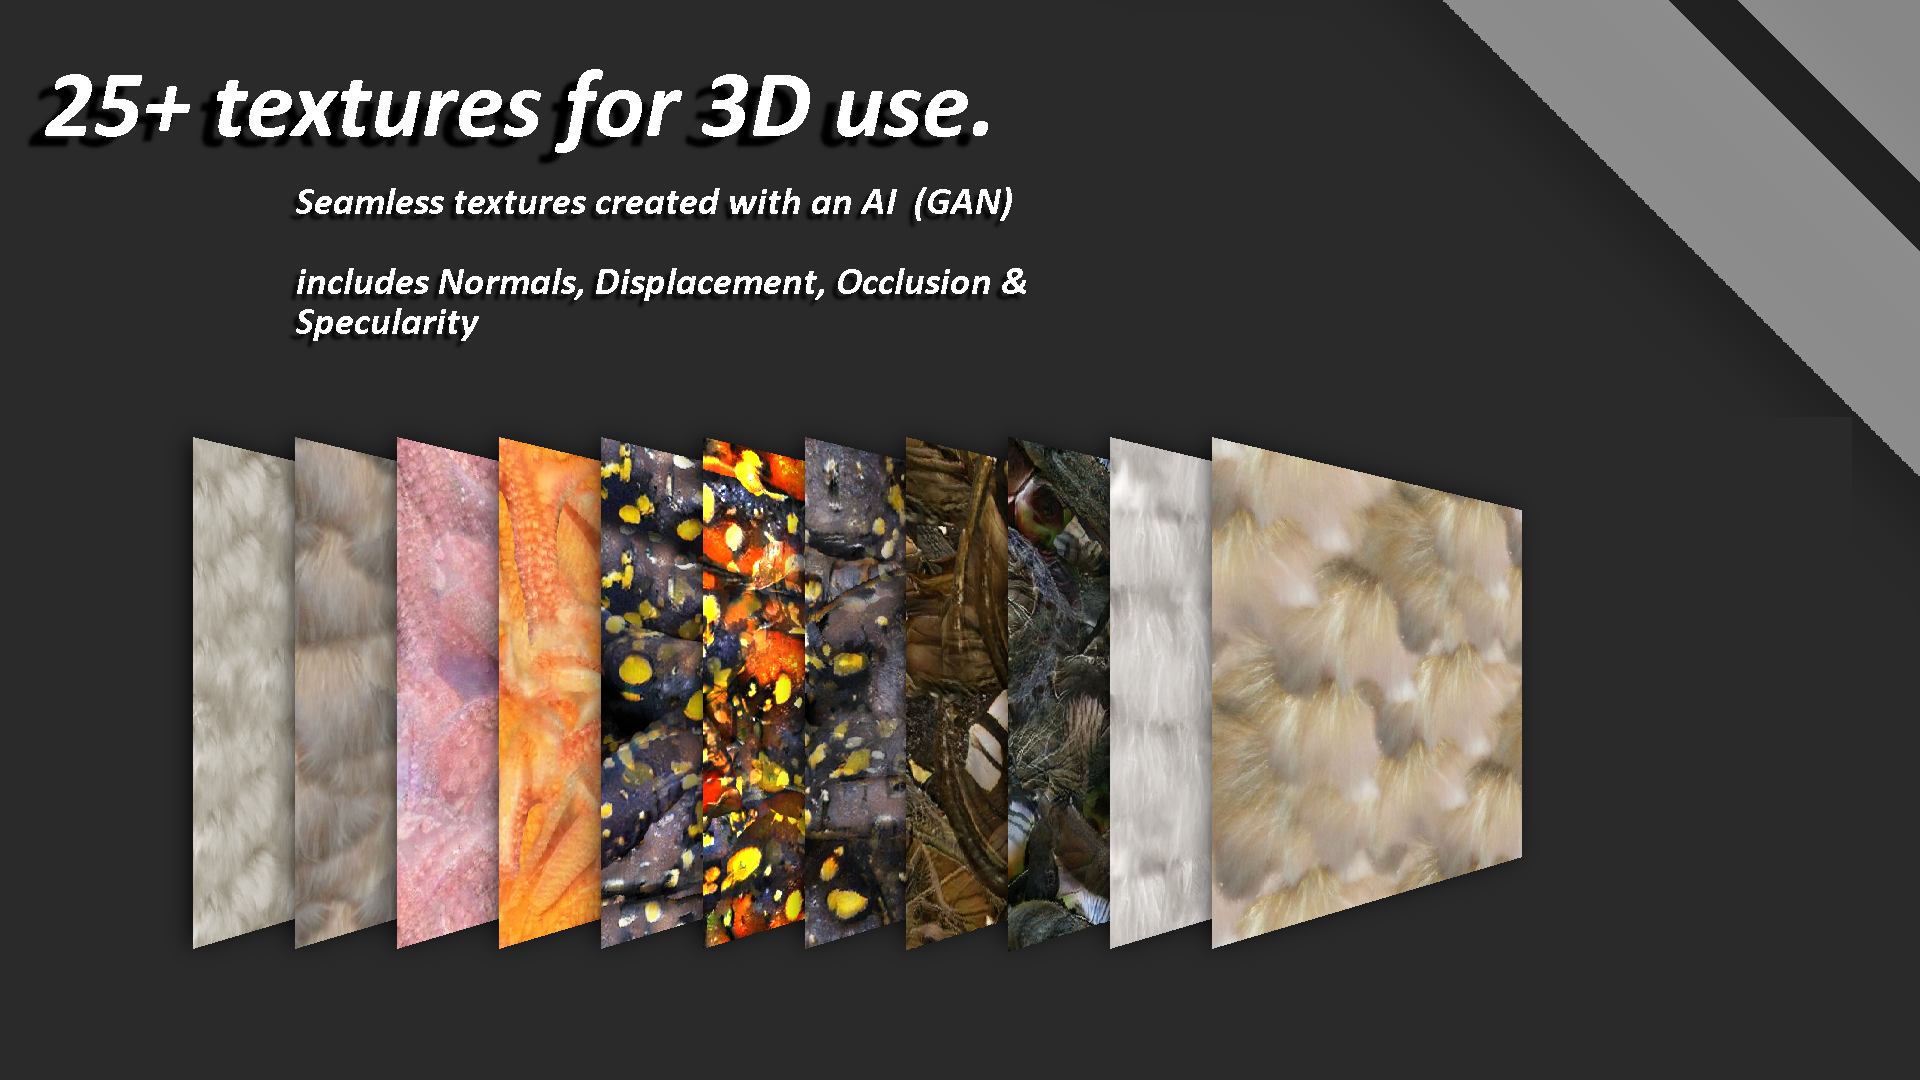 Exotic & Alien Textures For 3D Use